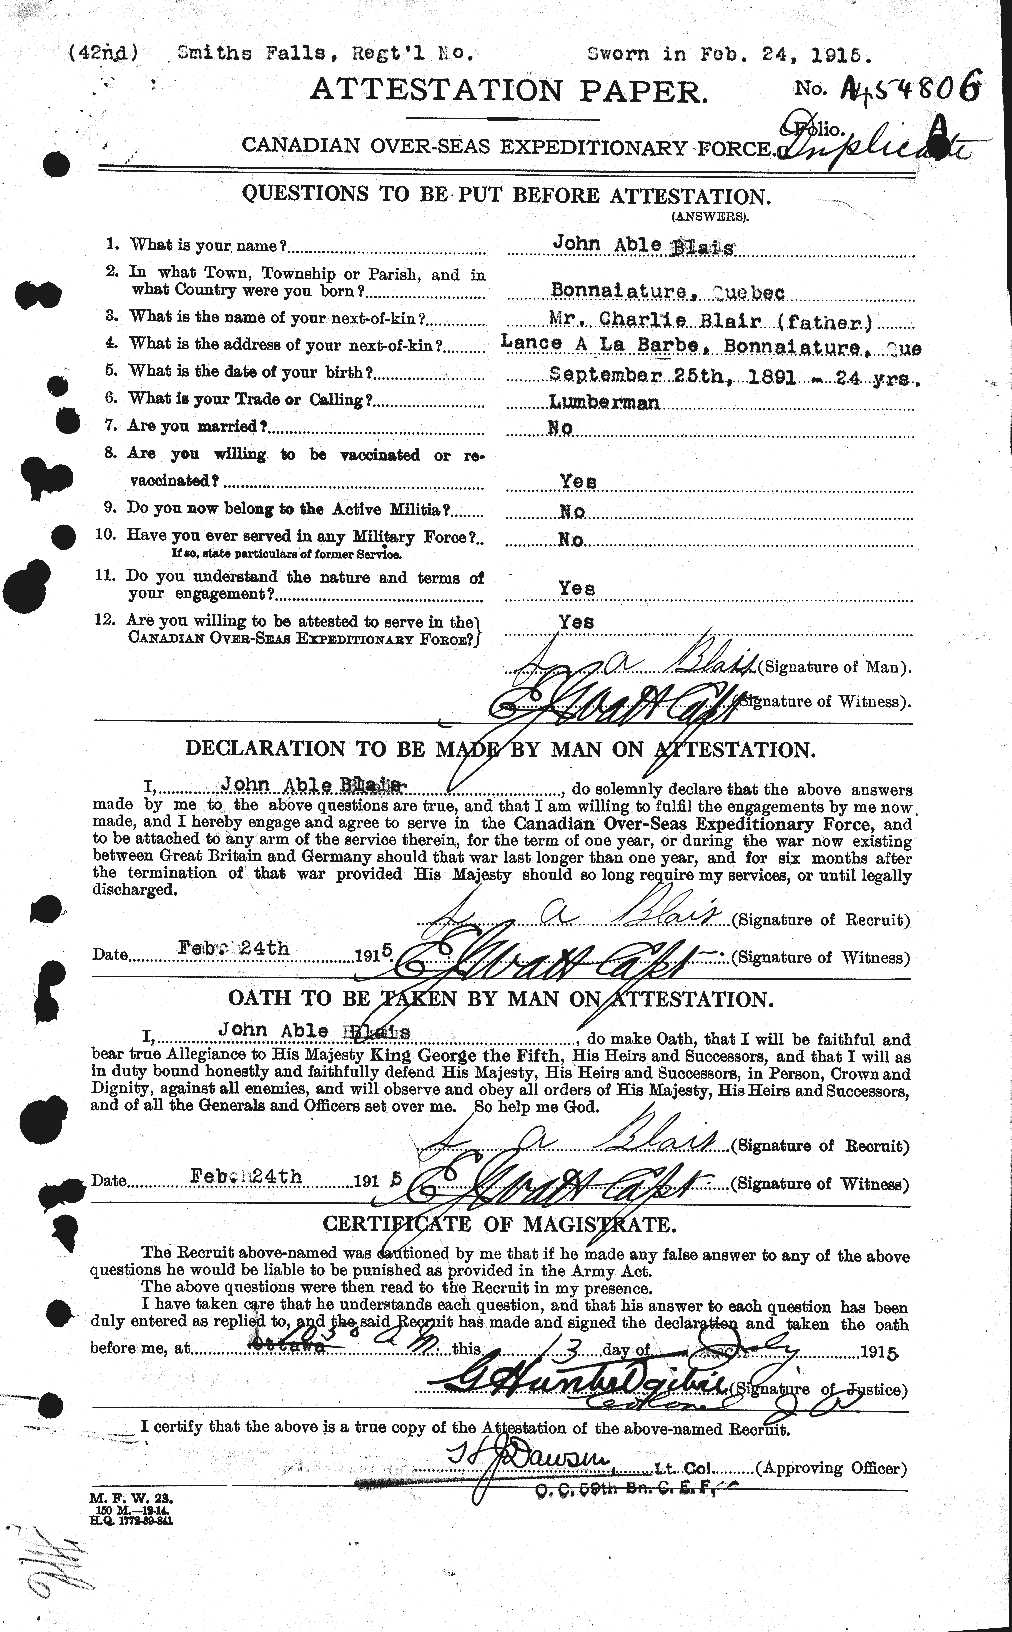 Personnel Records of the First World War - CEF 245455a